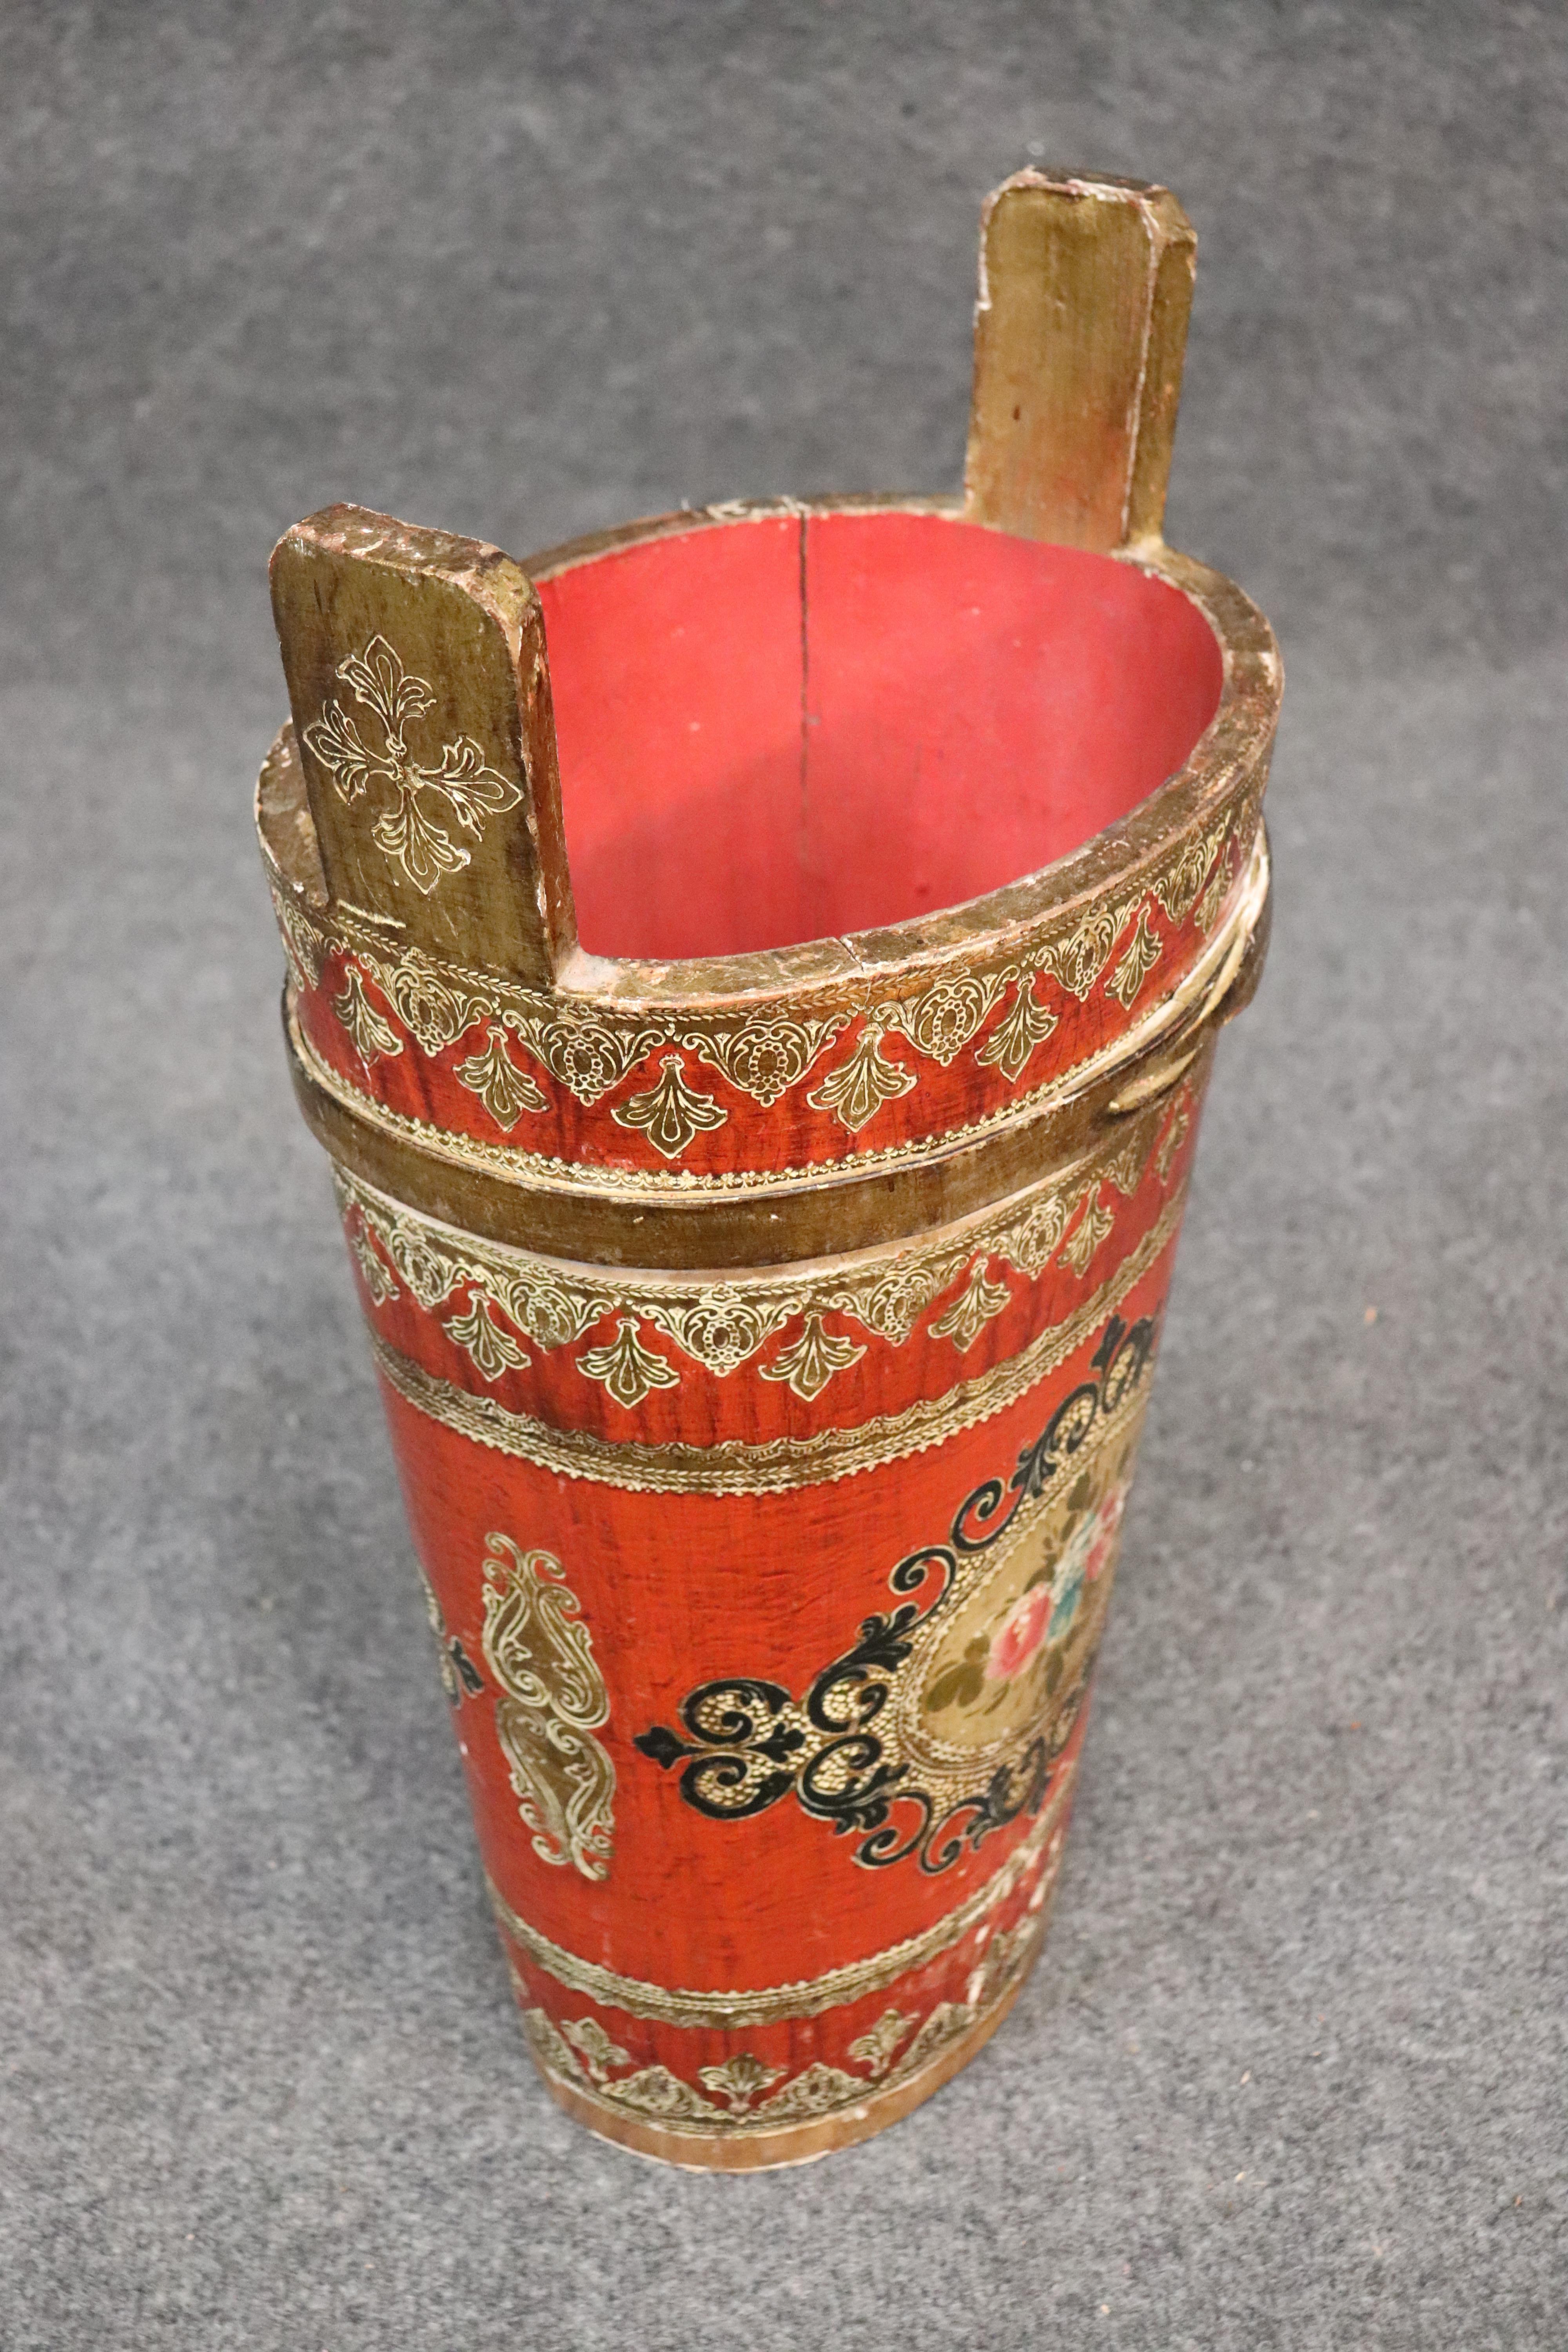 This is a gorgeous Florentine waste paper basket. Measures 21 tall x 13 wide x 9 deep.